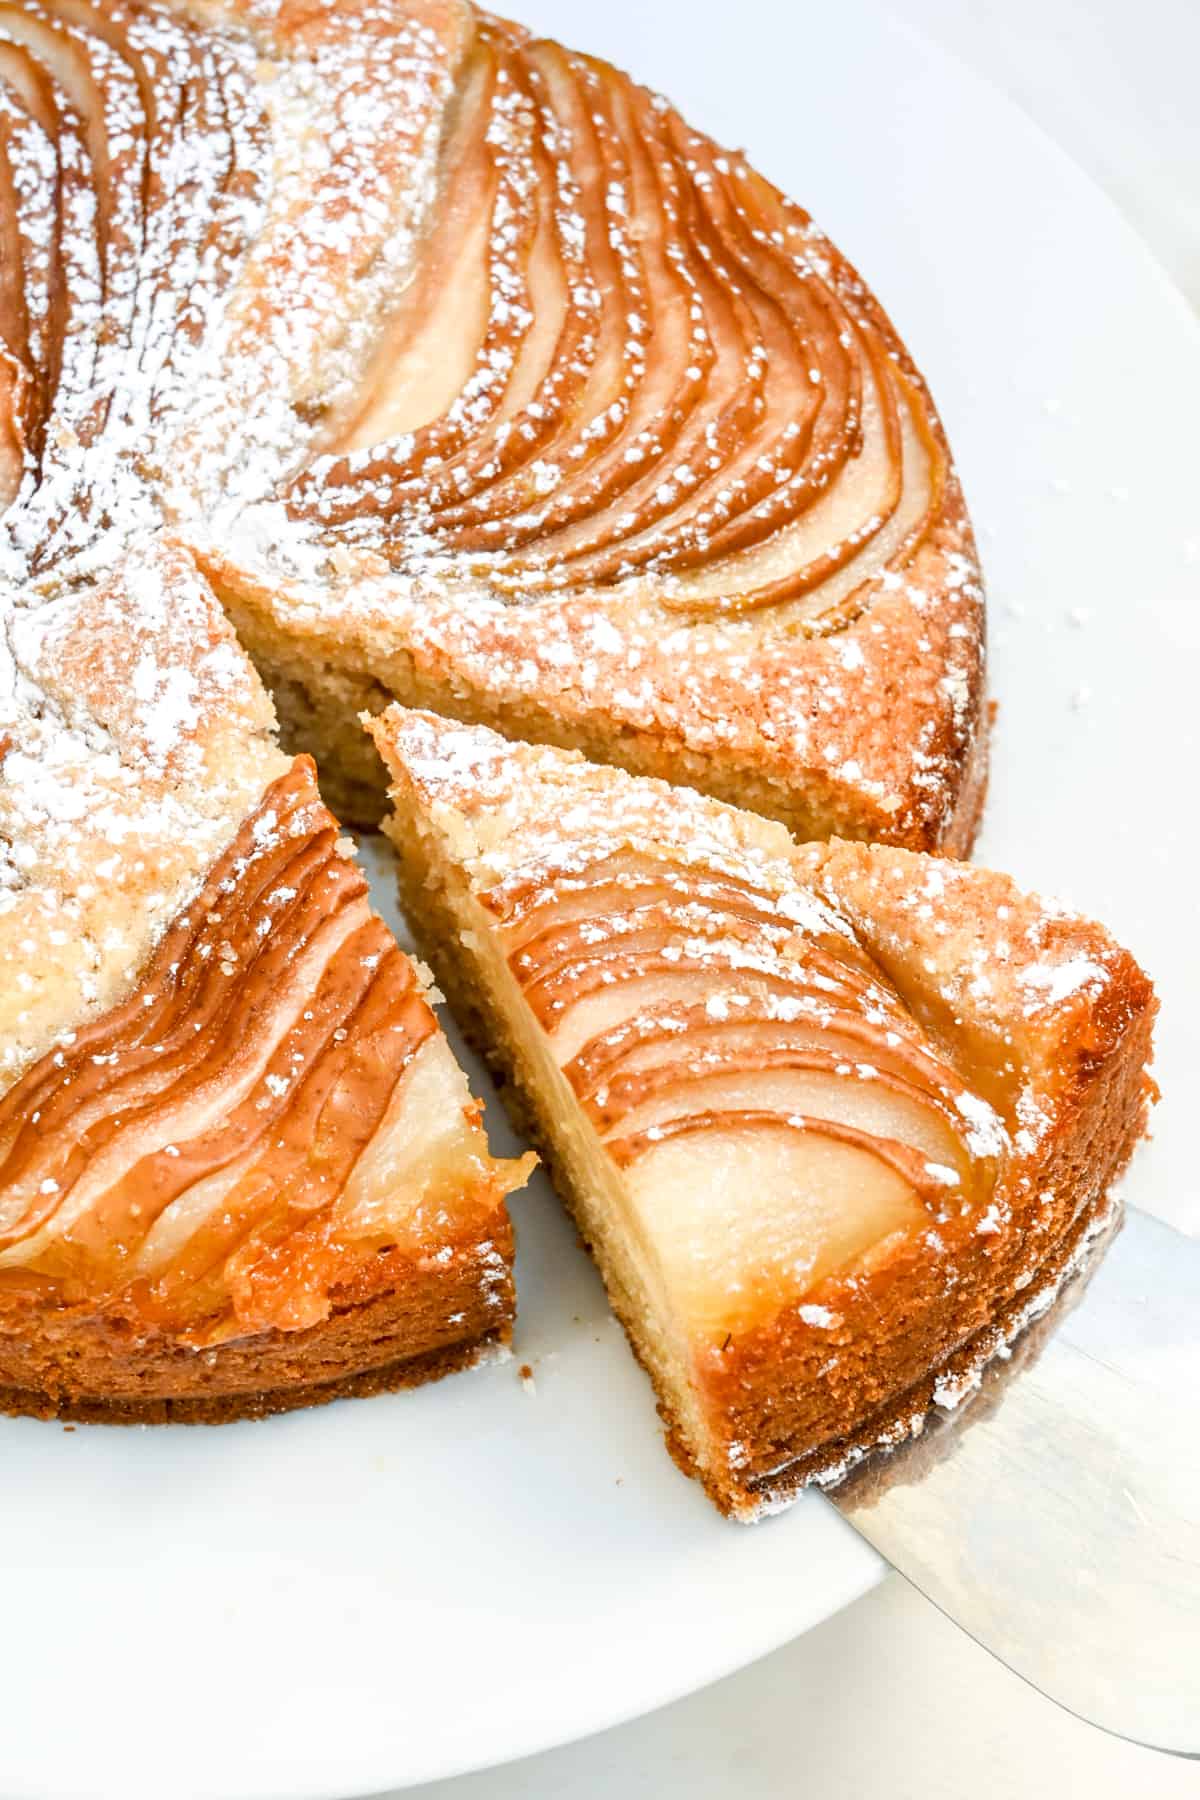 A slice is cut from the round pear cake and lifted away.